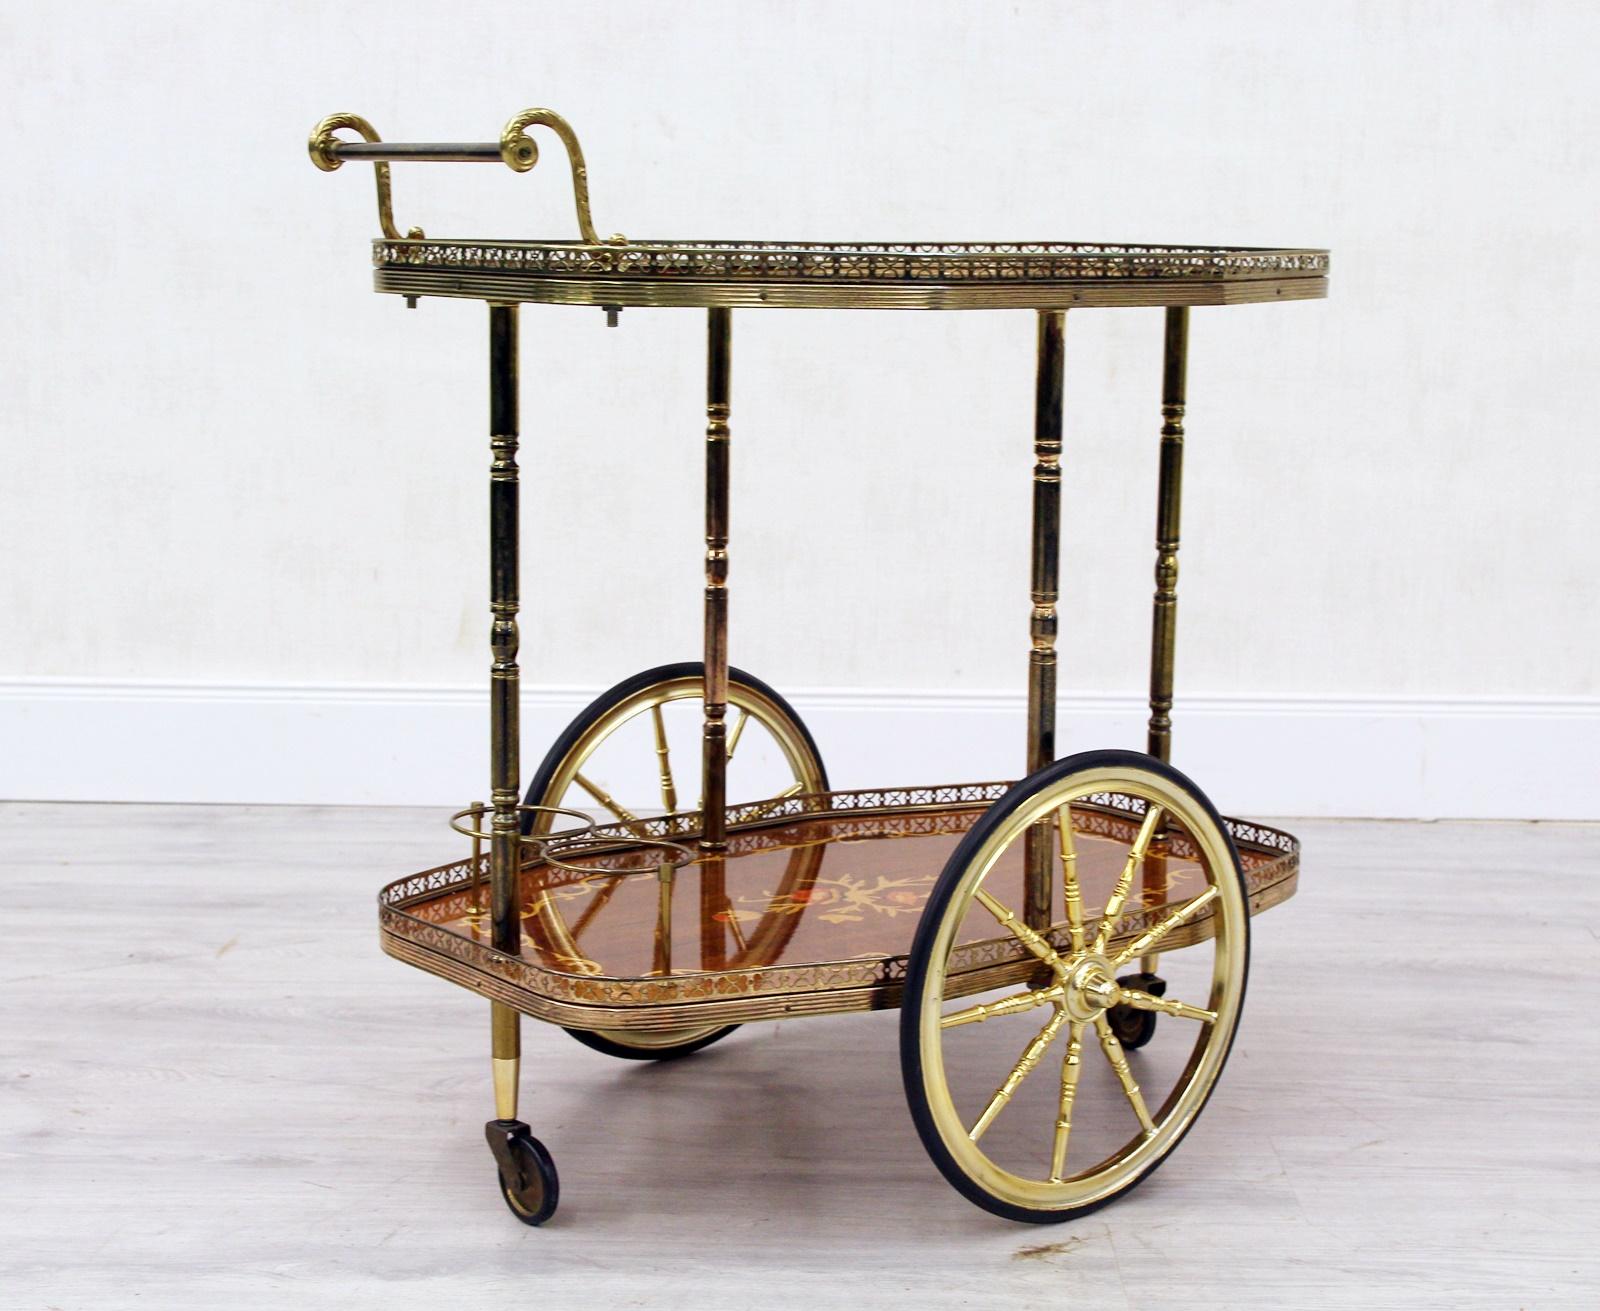 Gorgeous Teewagen

For sales is a beautiful exclusive tea car with great Intarsia
Dimensions:
Height 66cm, width 73cm, depth 45cm

- Normal age-related use tracks, see photos
- With great Intarsia
- Processed with brass
- Super total